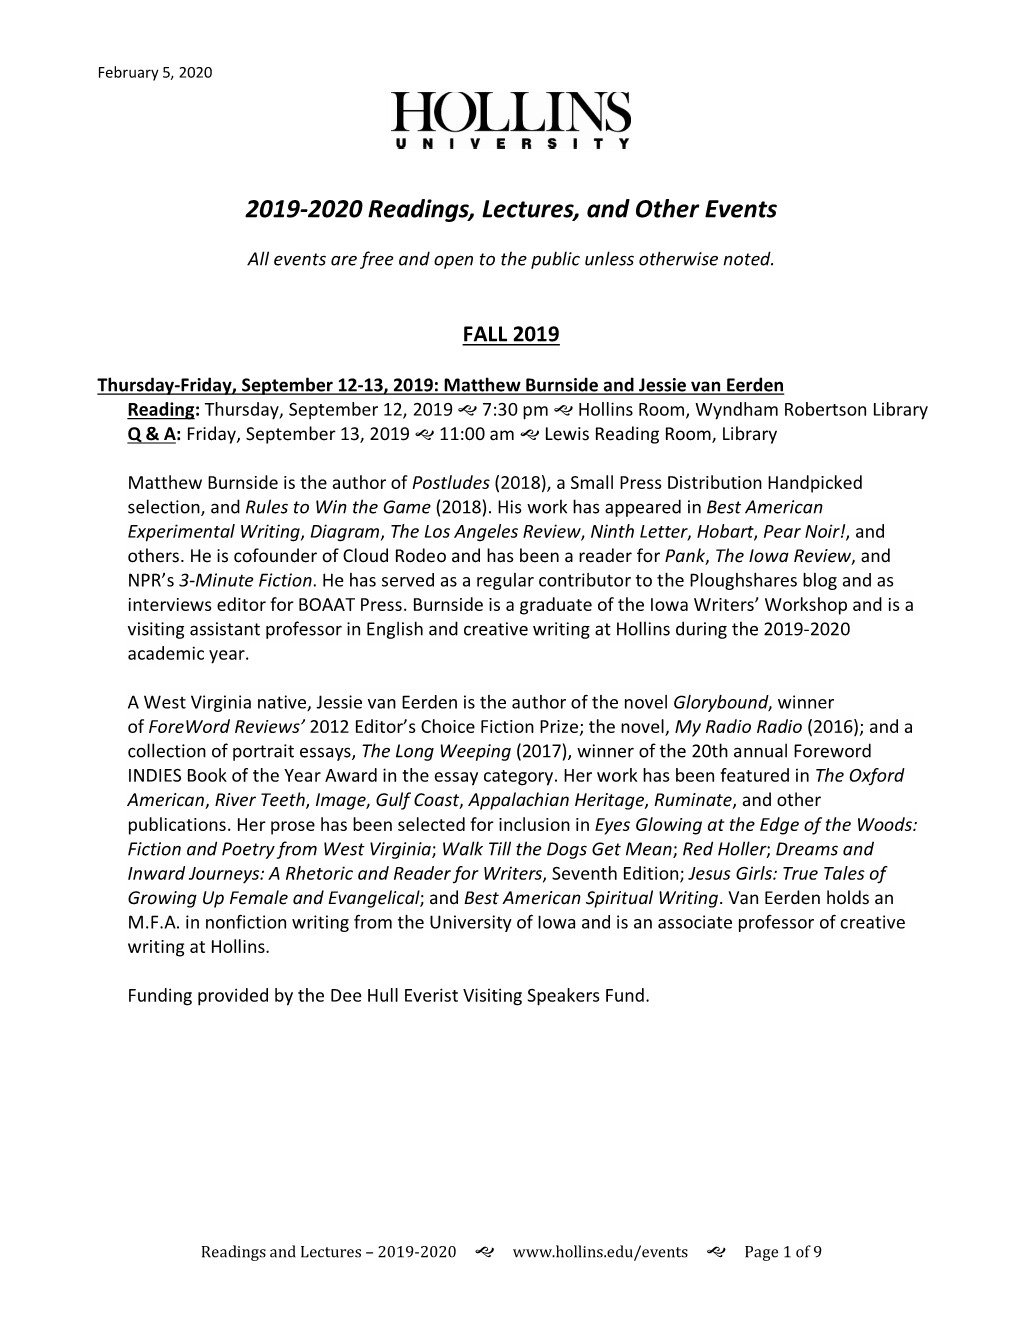 2019-2020 Readings, Lectures, and Other Events